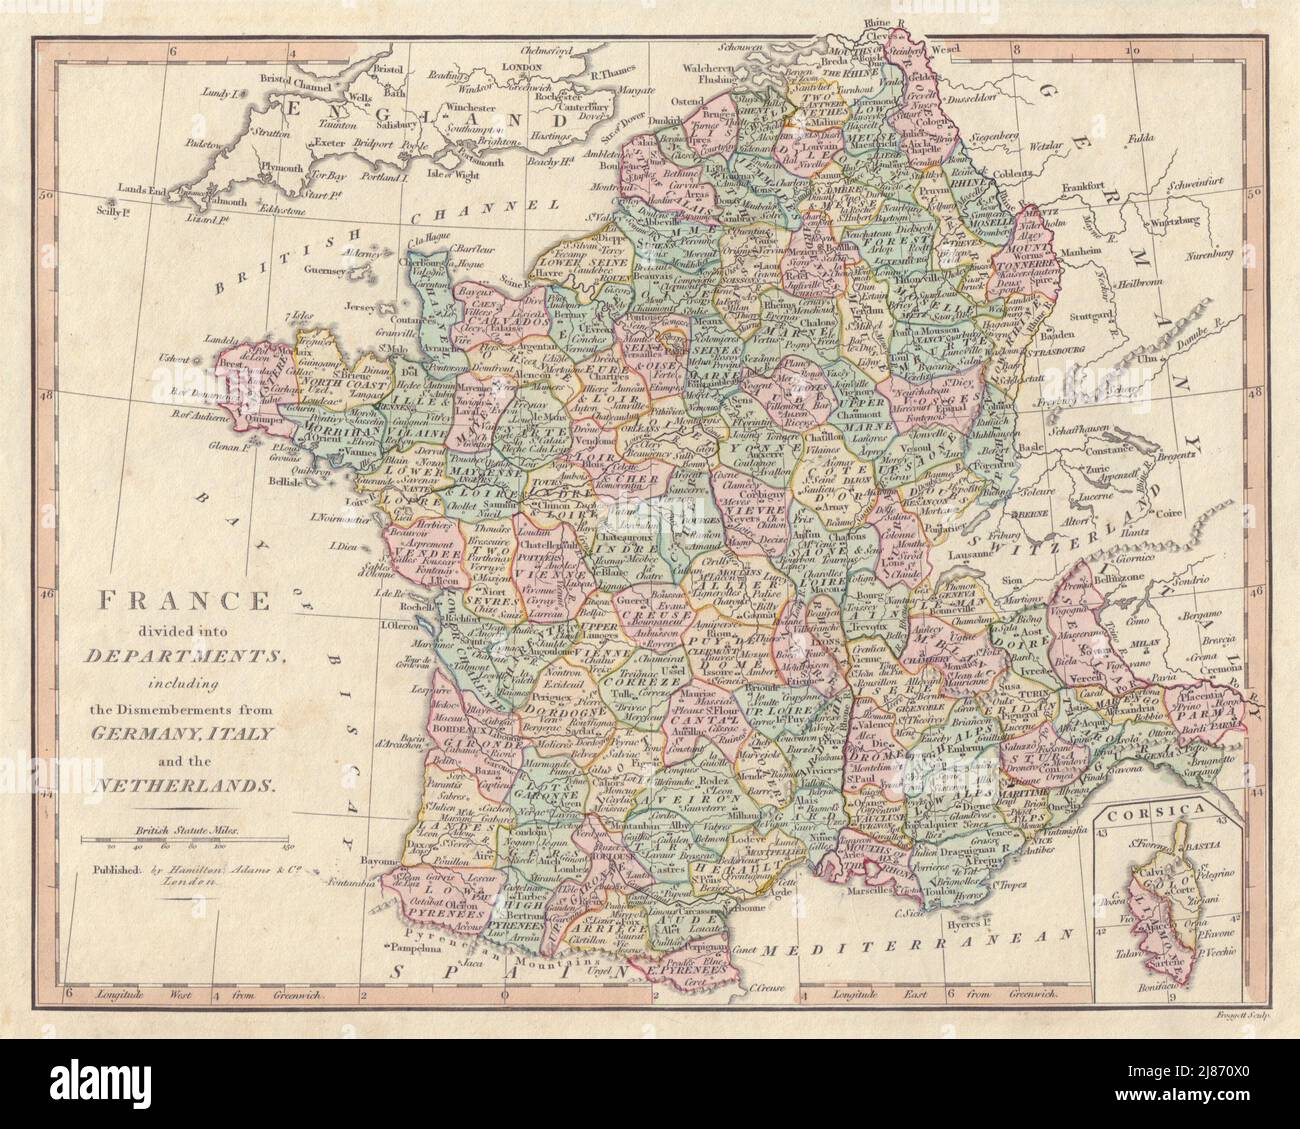 France divided into Departments including the dismemberments… WILKINSON 1828 map Stock Photo